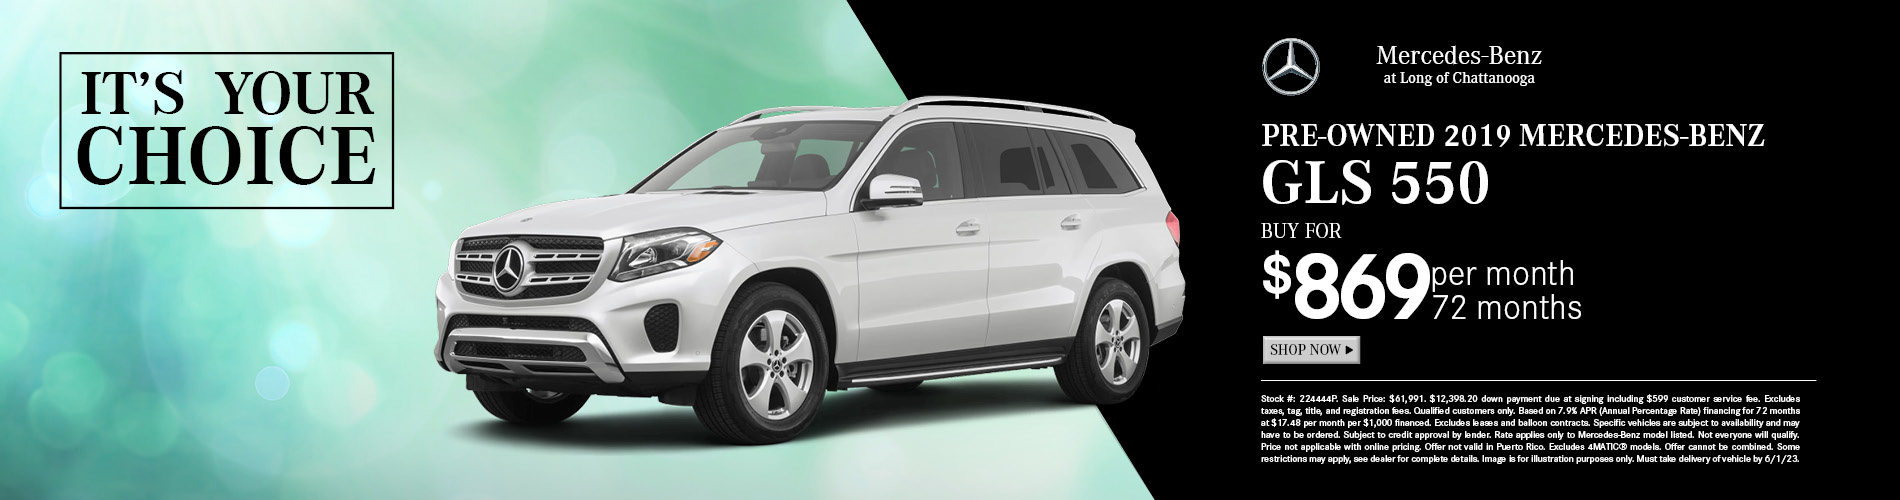 Certified Pre-Owned Mercedes-Benz GLS